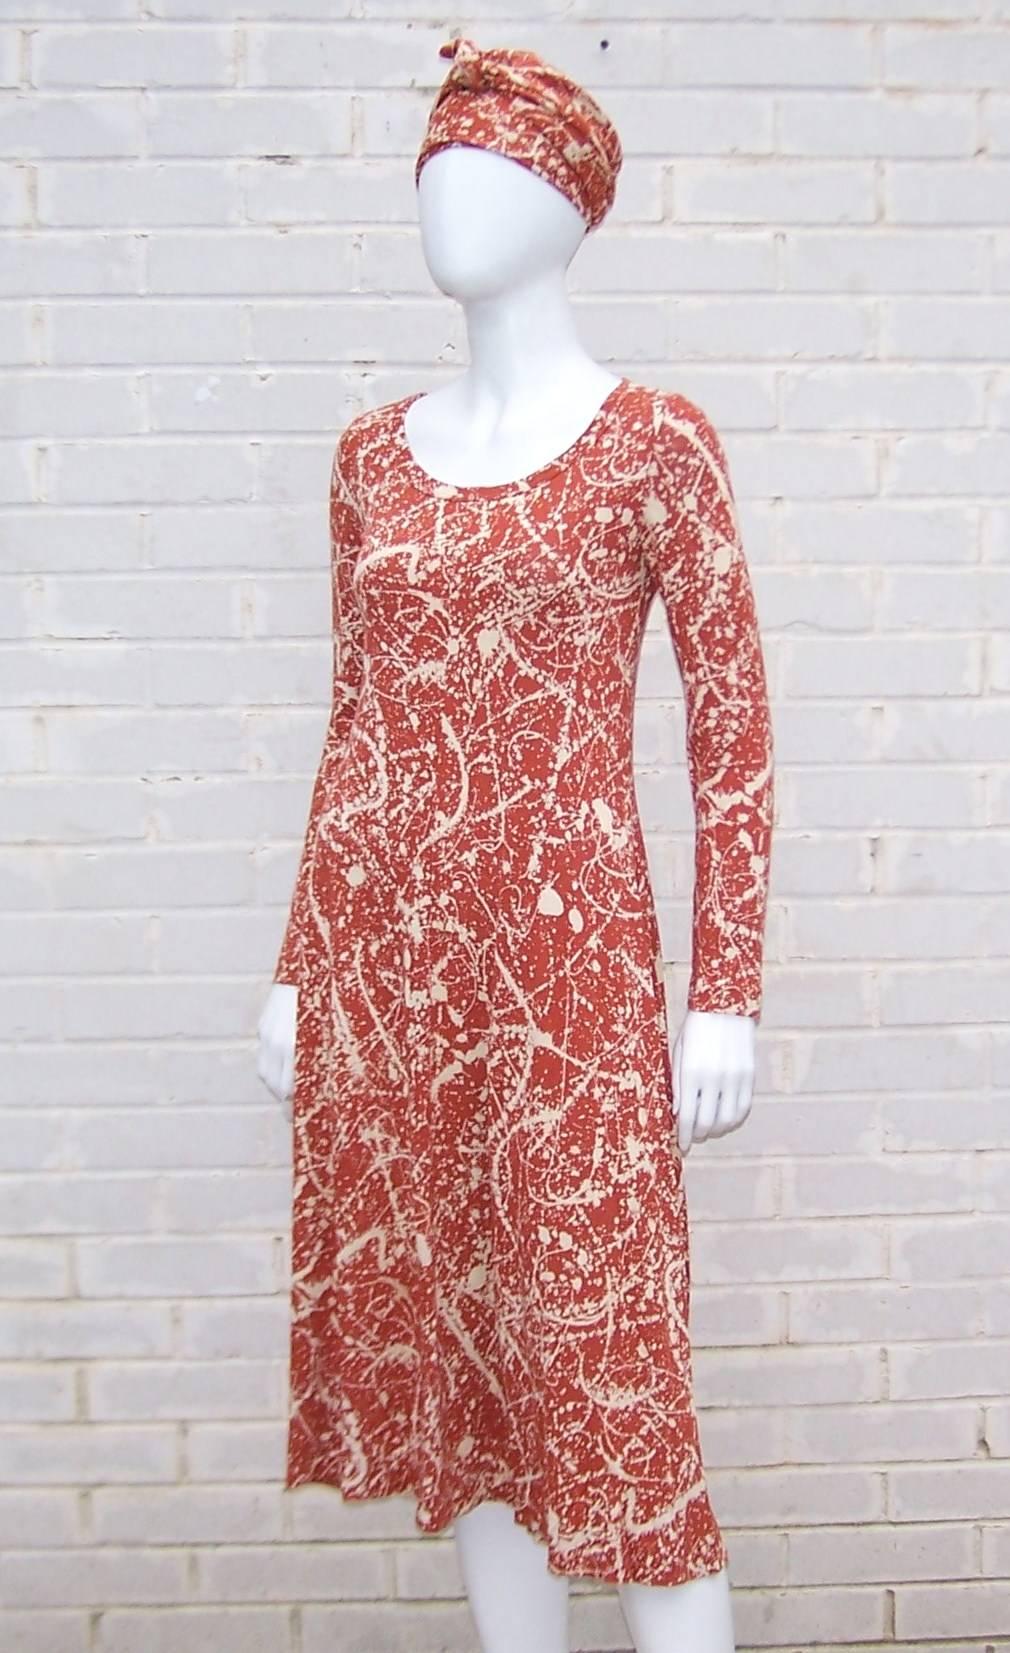 Perfect transitional weight dress to go from the summer to fall by the innovative 1970's designs of Diane Von Furstenberg.  The Jackson Pollock style splatter print is a rusty brown color with creme highlights all in a comfortable 100% acrylic